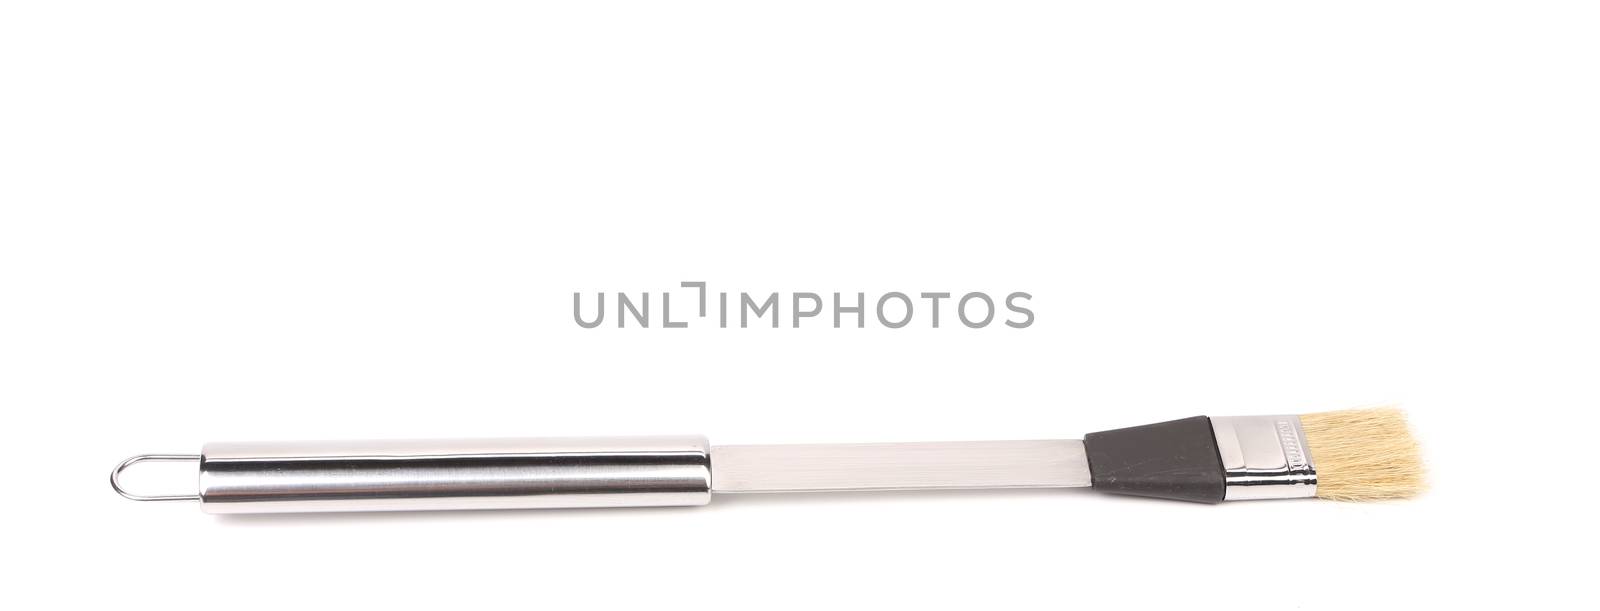 Metallic barbeque brush. Isolated on a white background